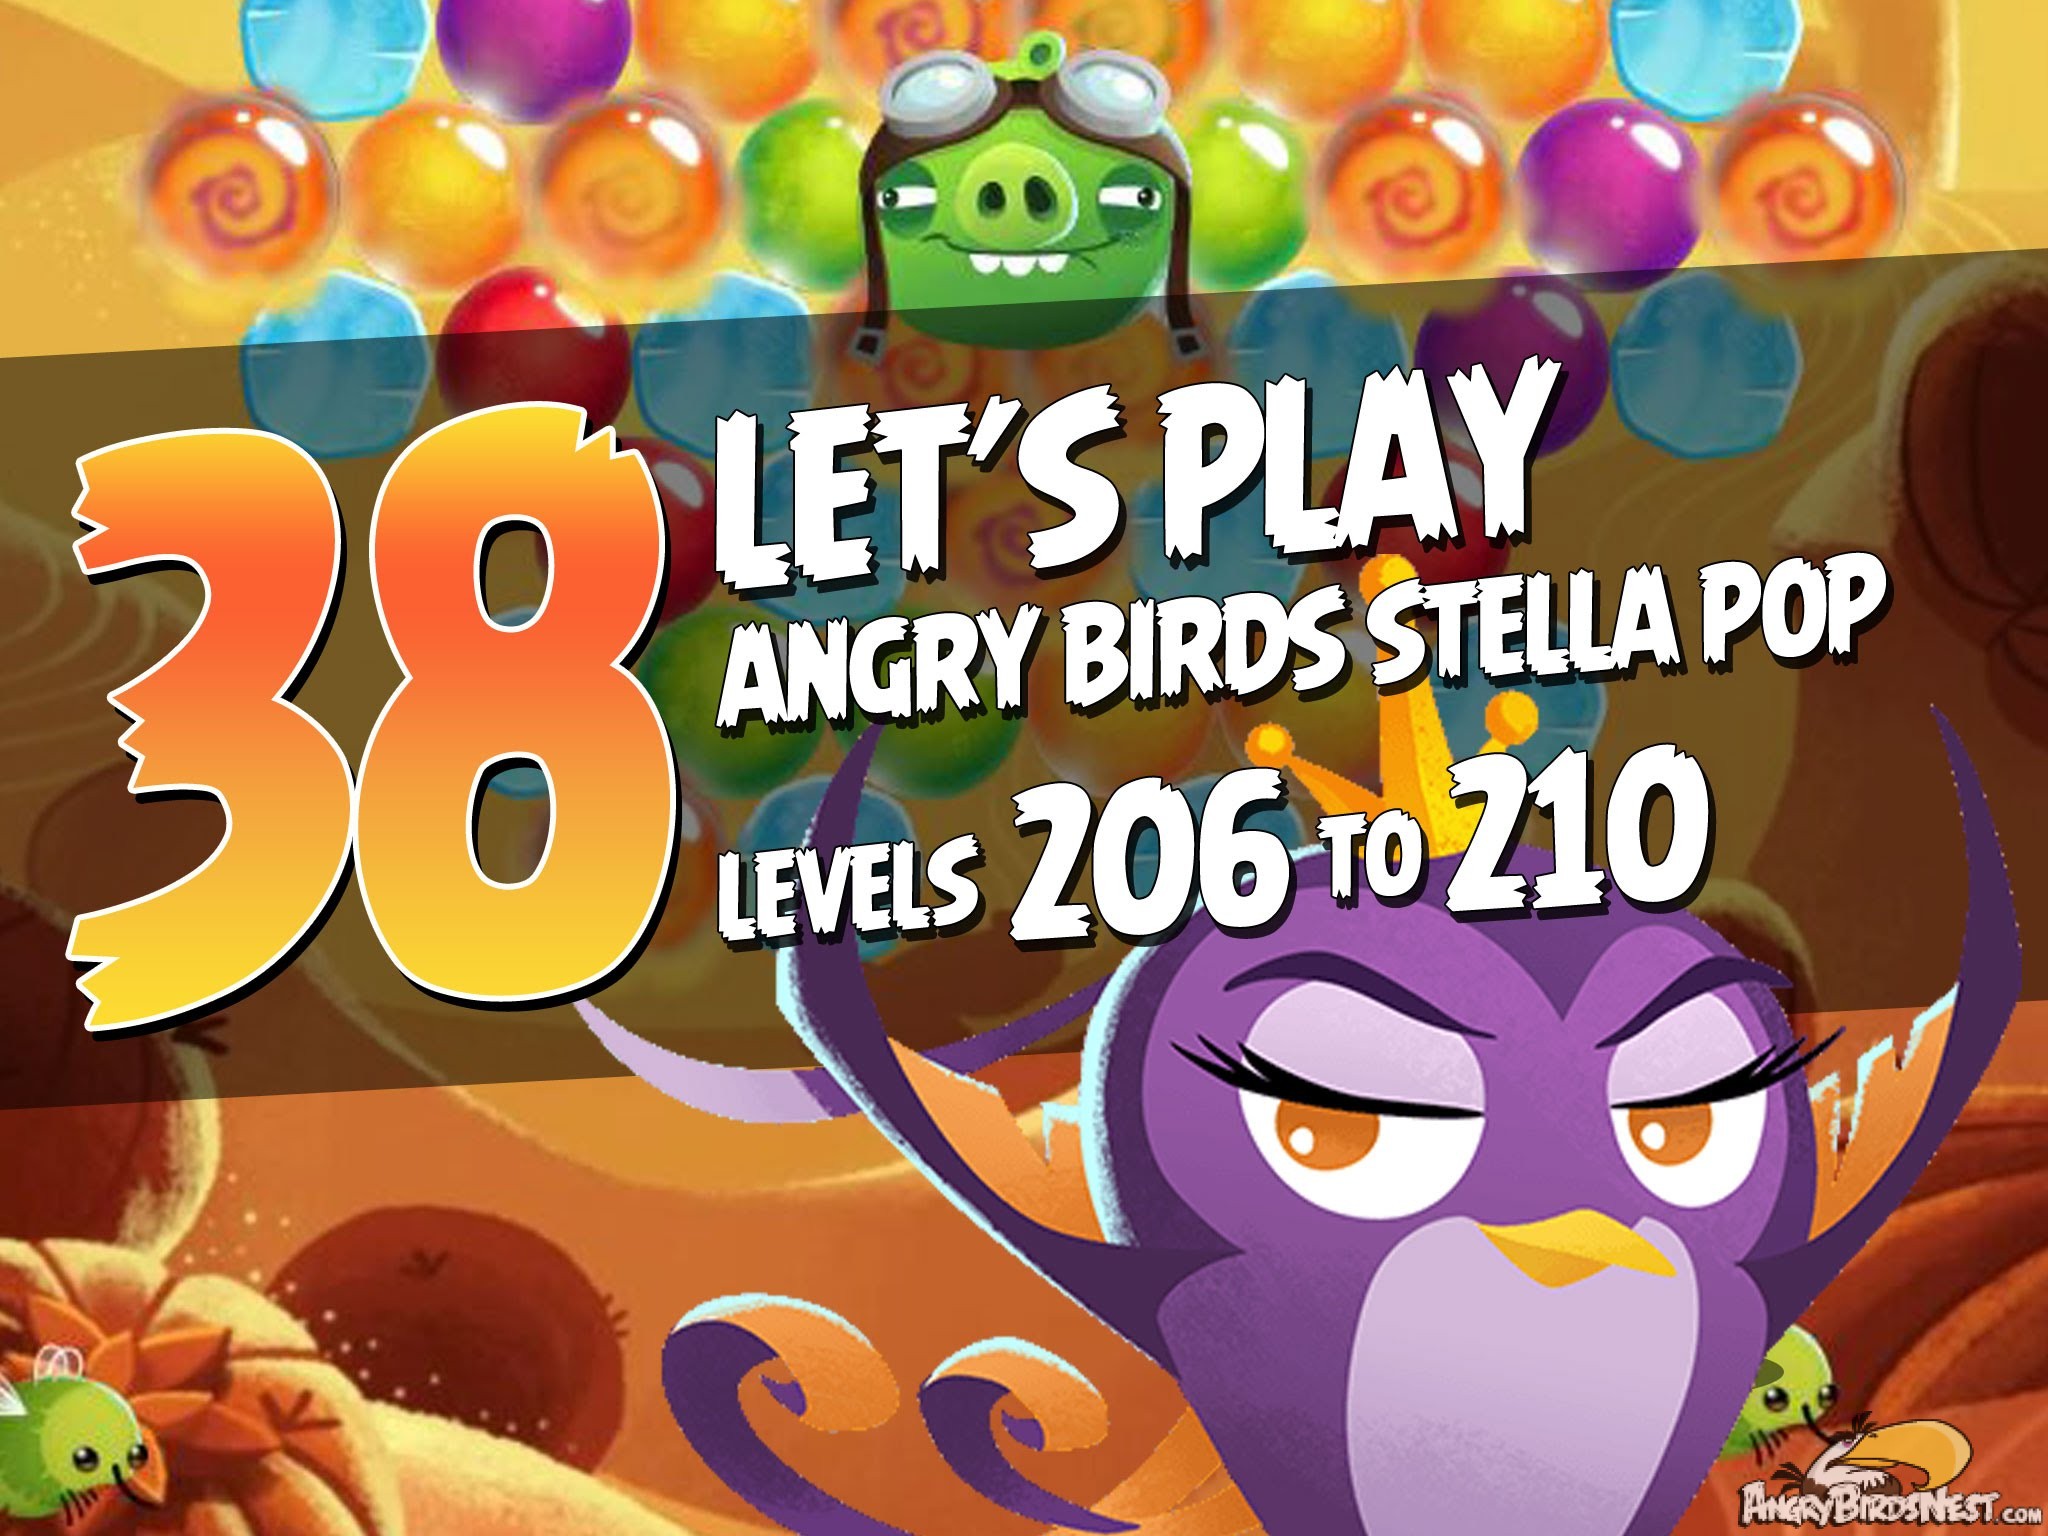 Angry Birds Stella Pop Let's Play Levels 206 to 210